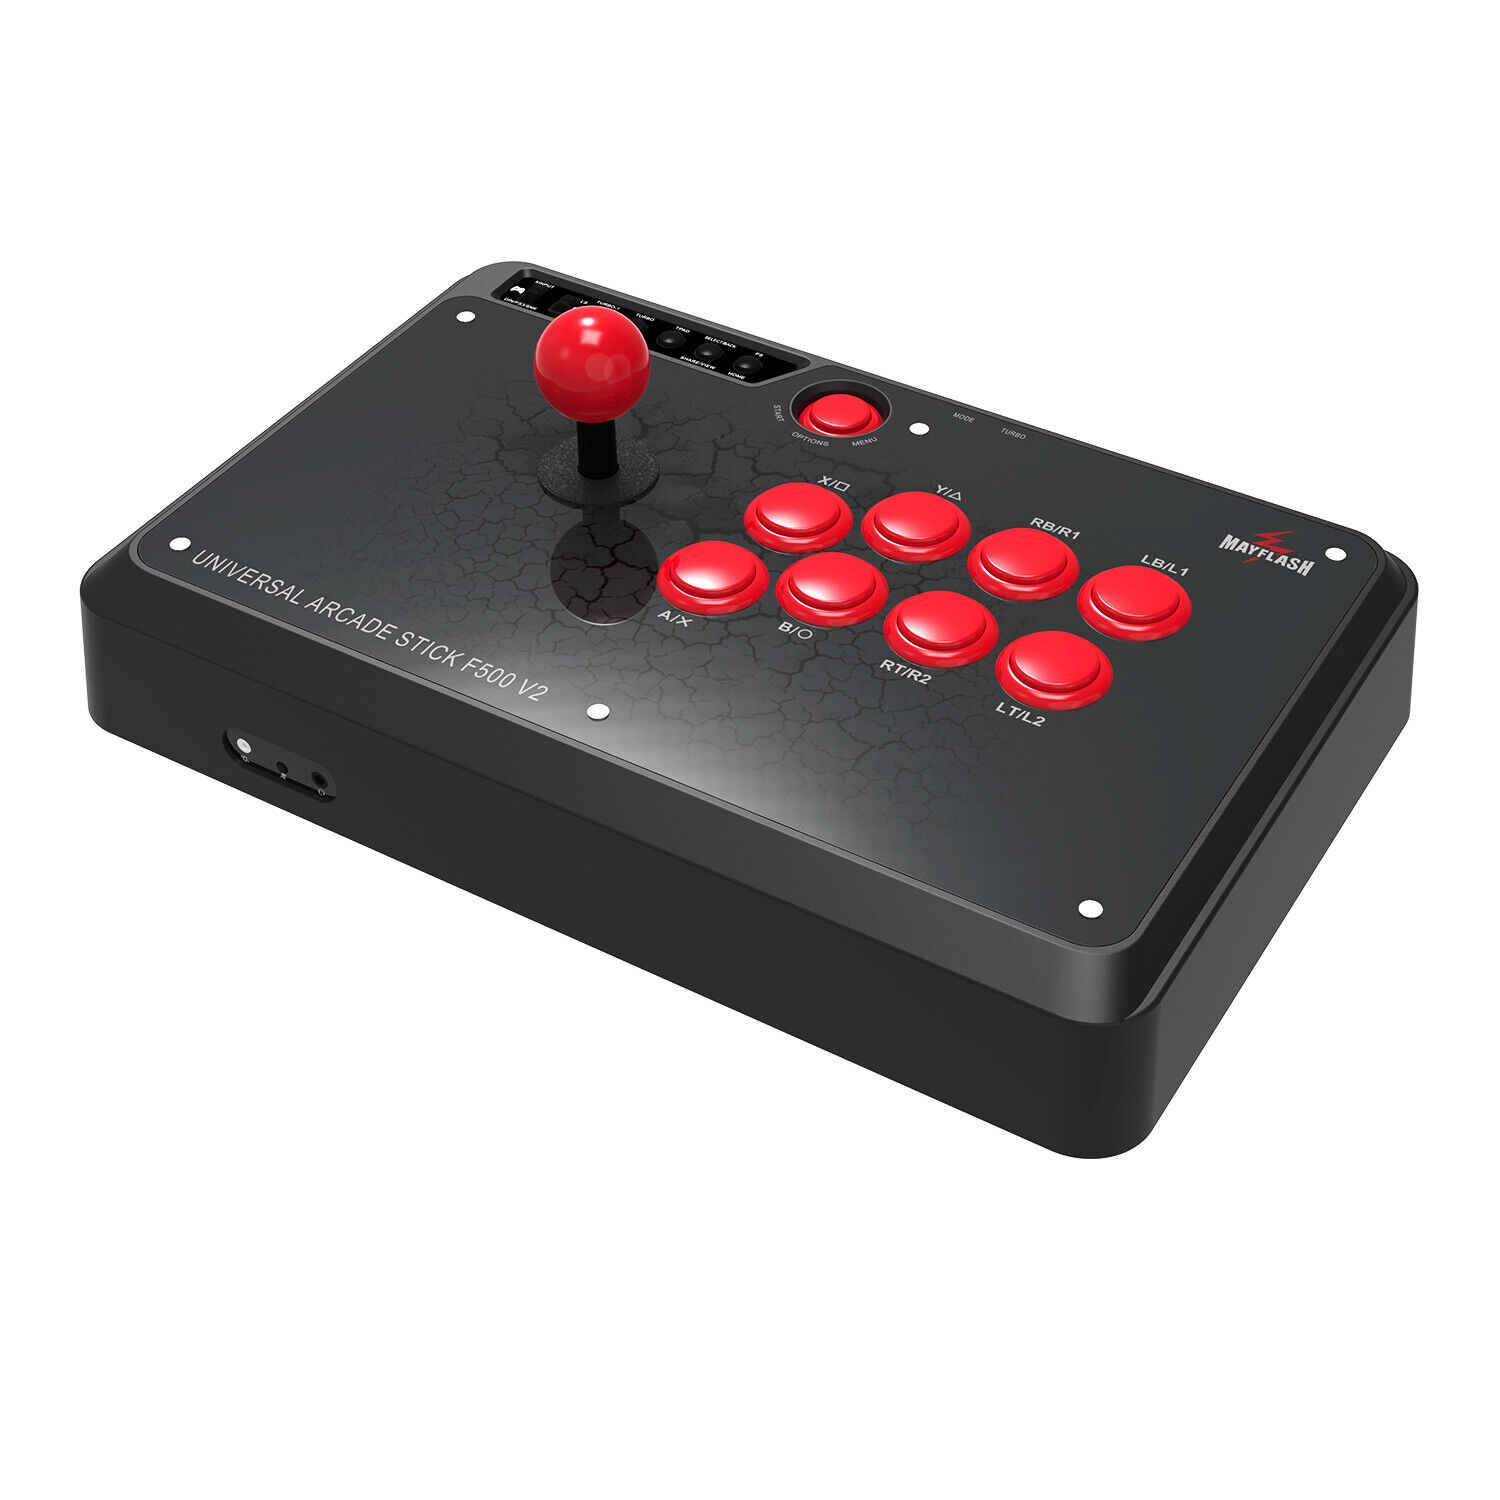 Consent Billable yours Mayflash F500 V2 Arcade Fight Stick For PS4/PS3/XBOX ONE/XBOX  360/PC/Android – ASA College: Florida